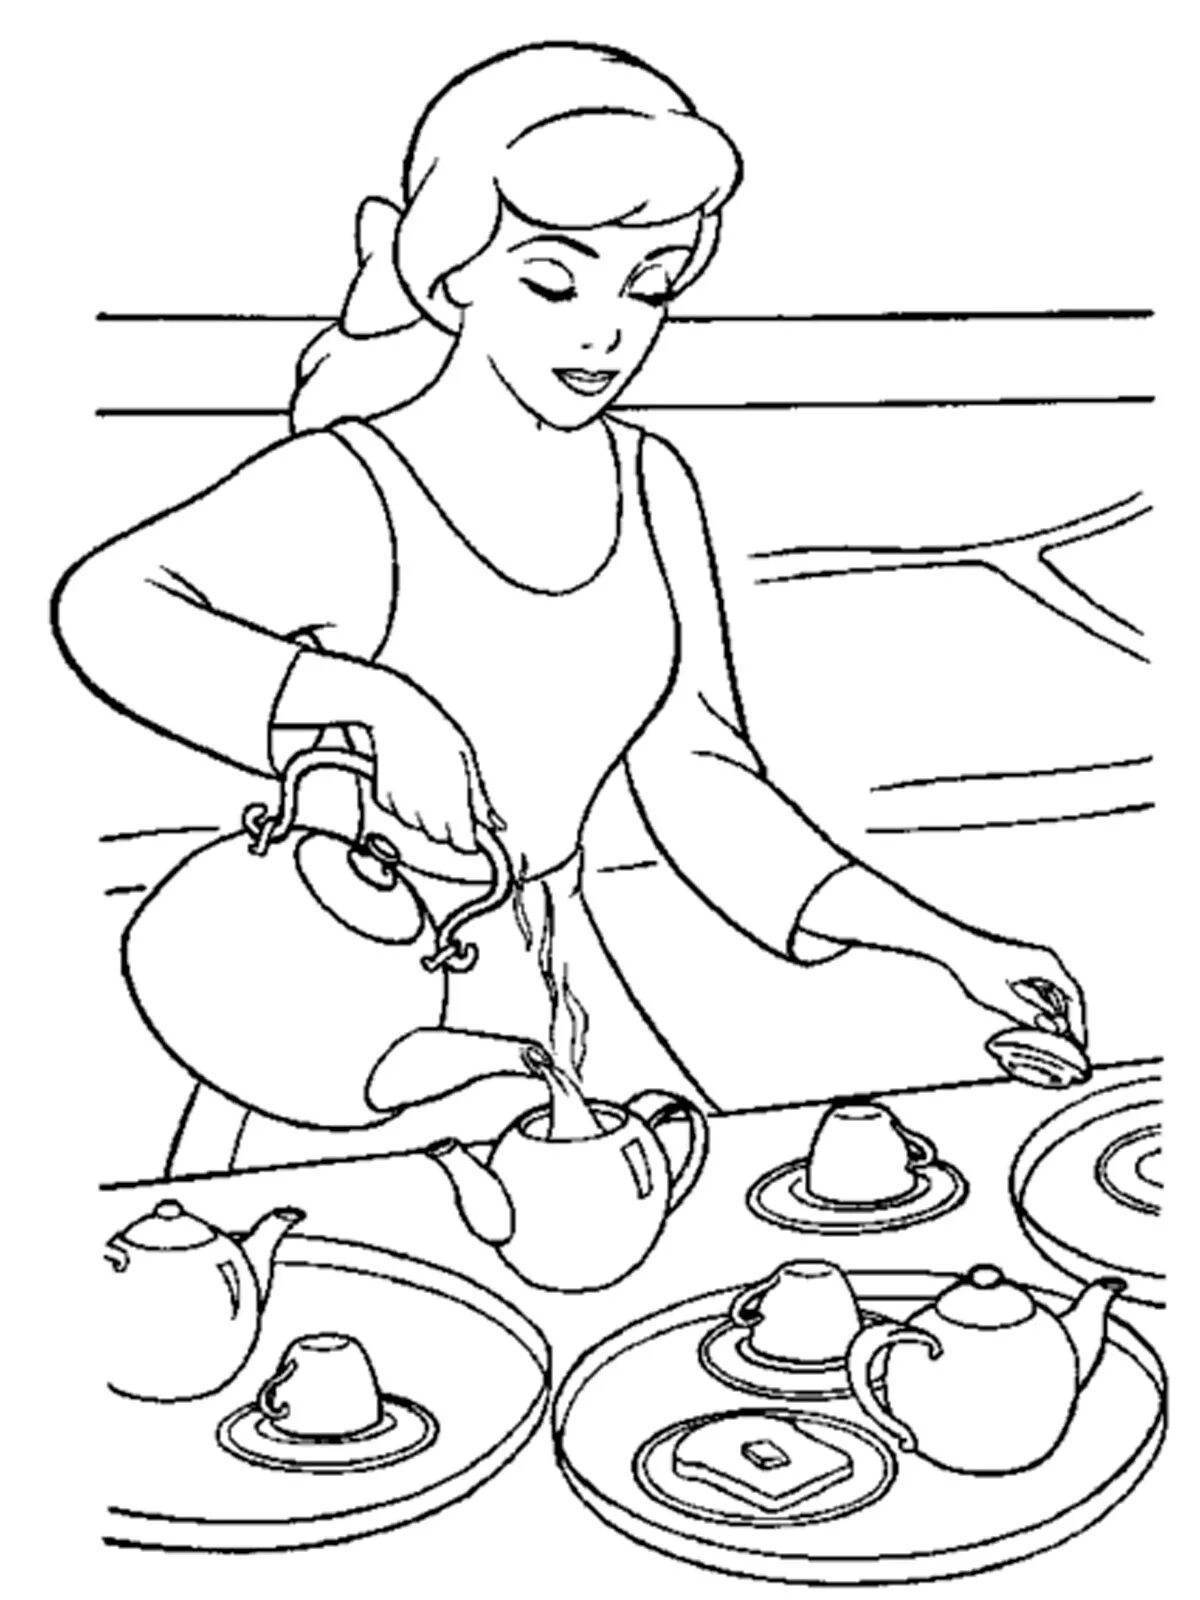 Coloring page happy housewife